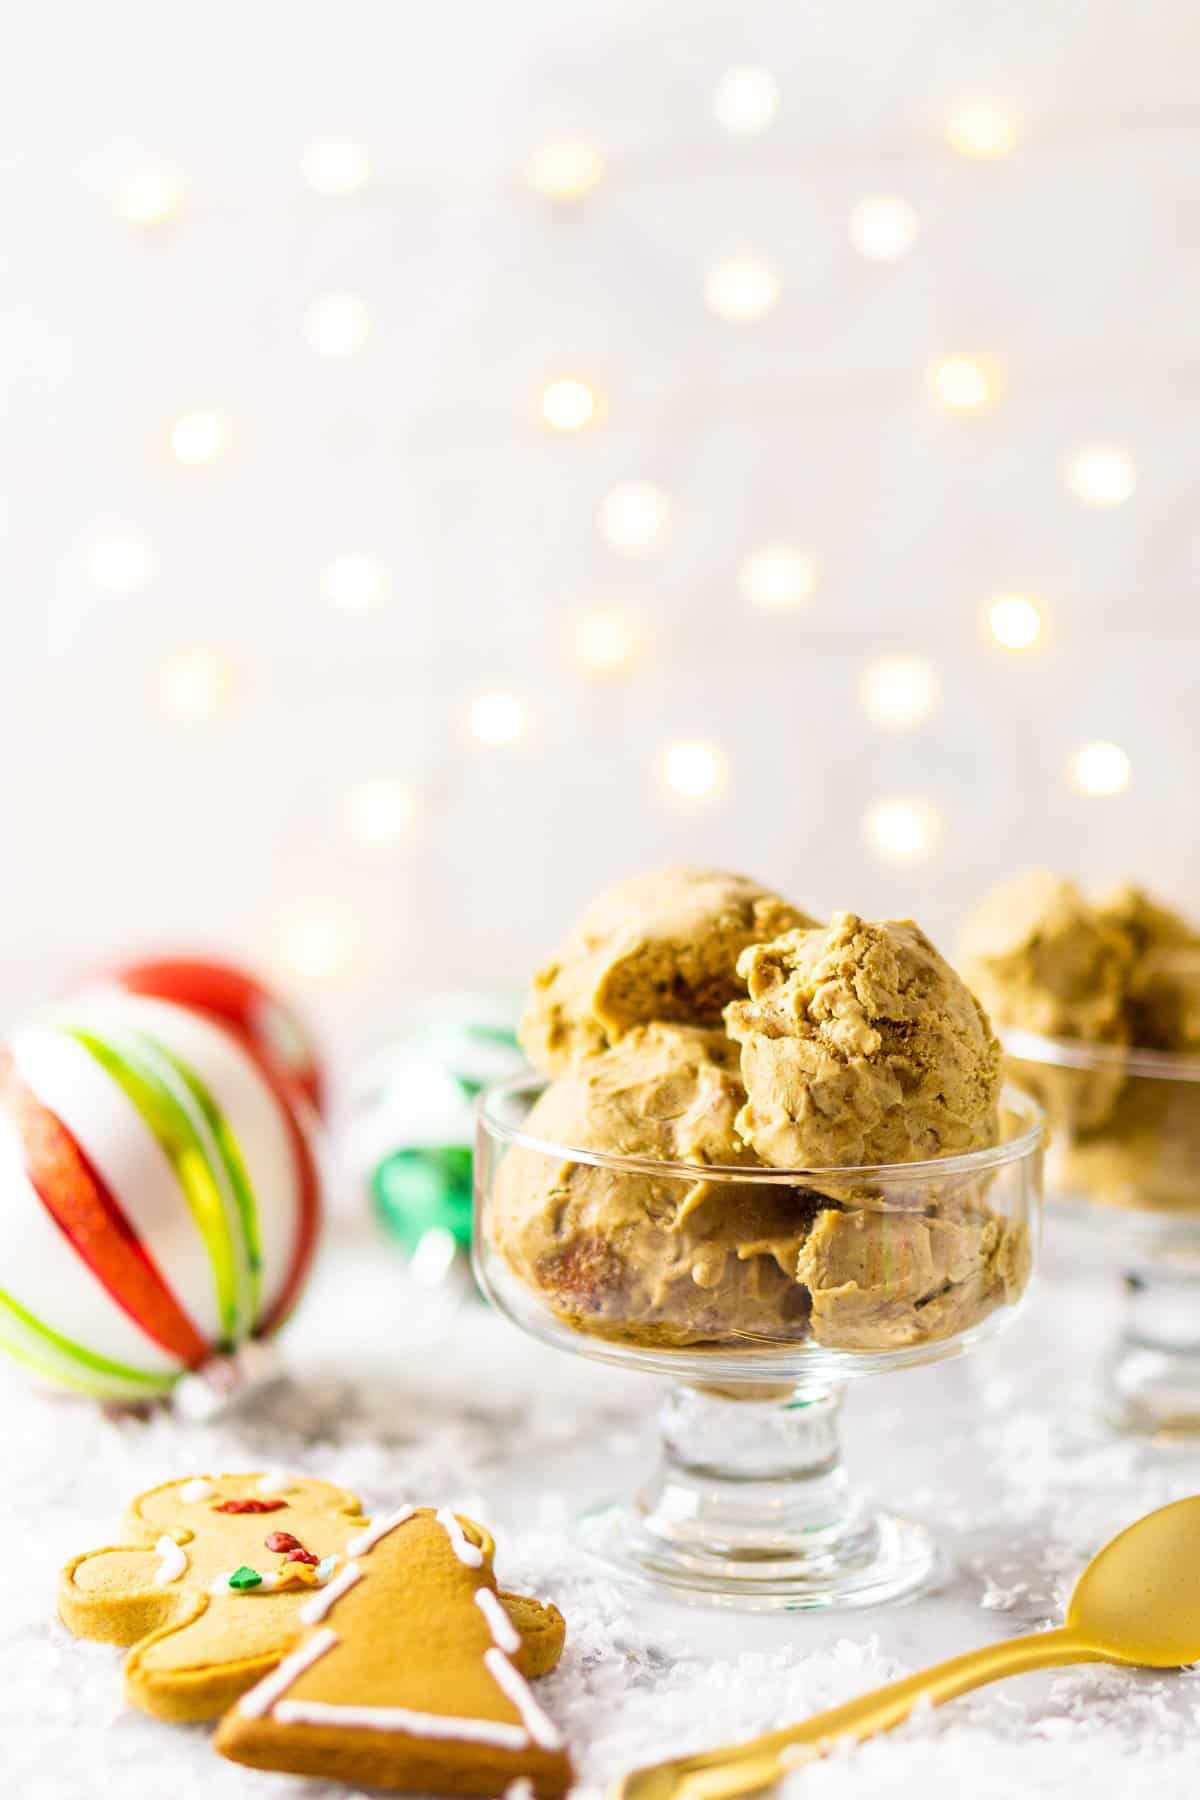 A bowl of gingerbread ice cream with lights in the background, a spoon to the side and Christmas decor around it.